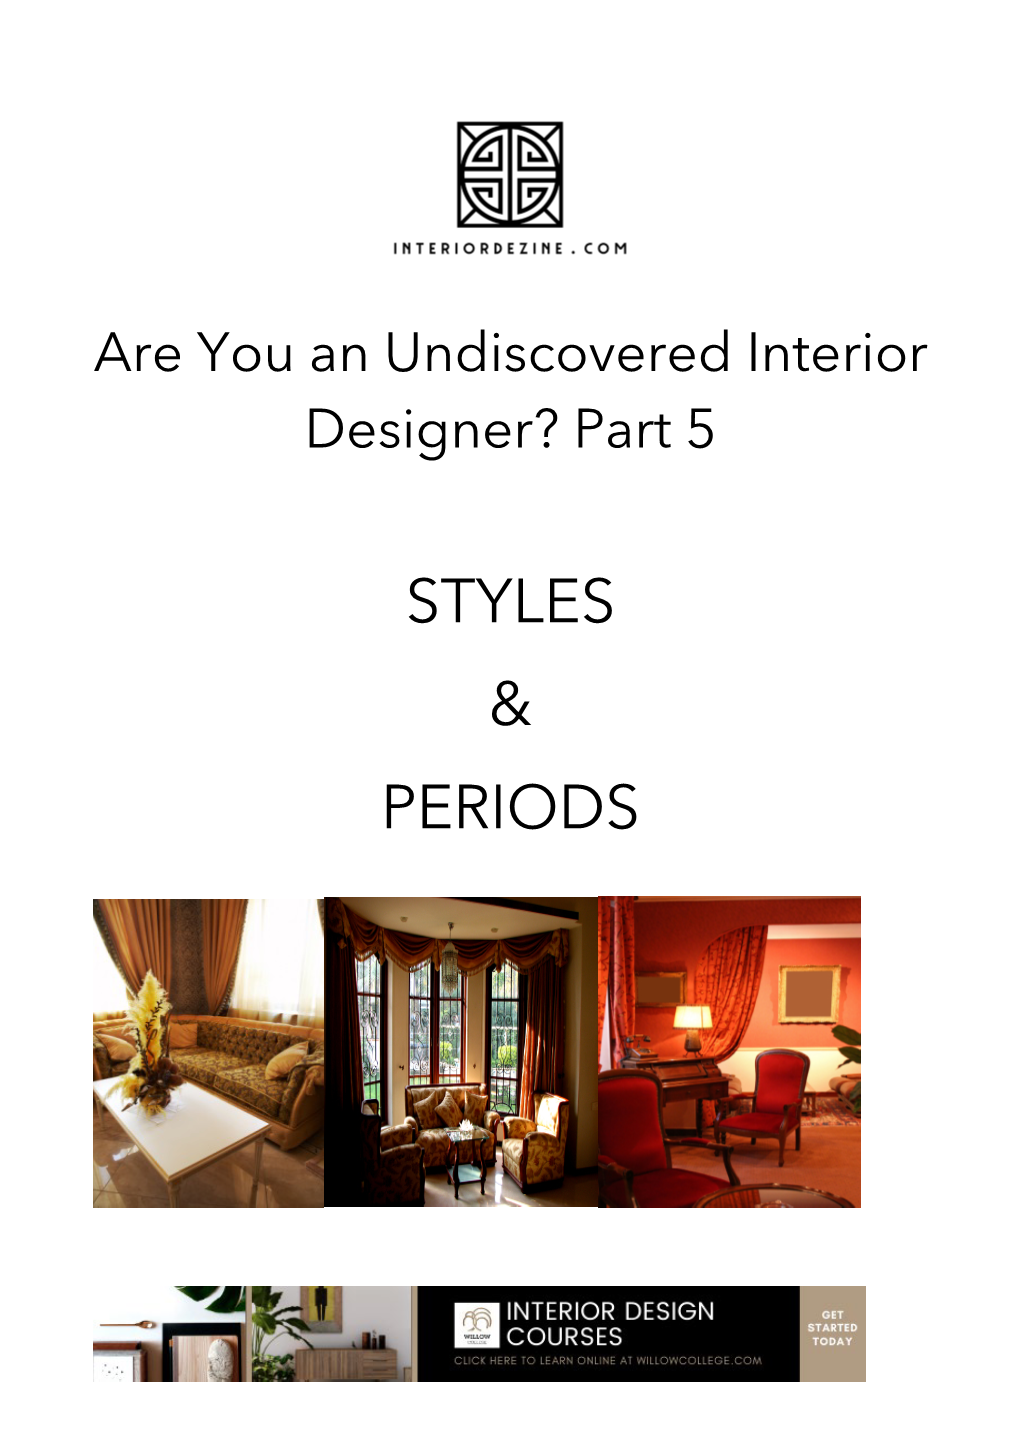 Styles, Periods and Design History